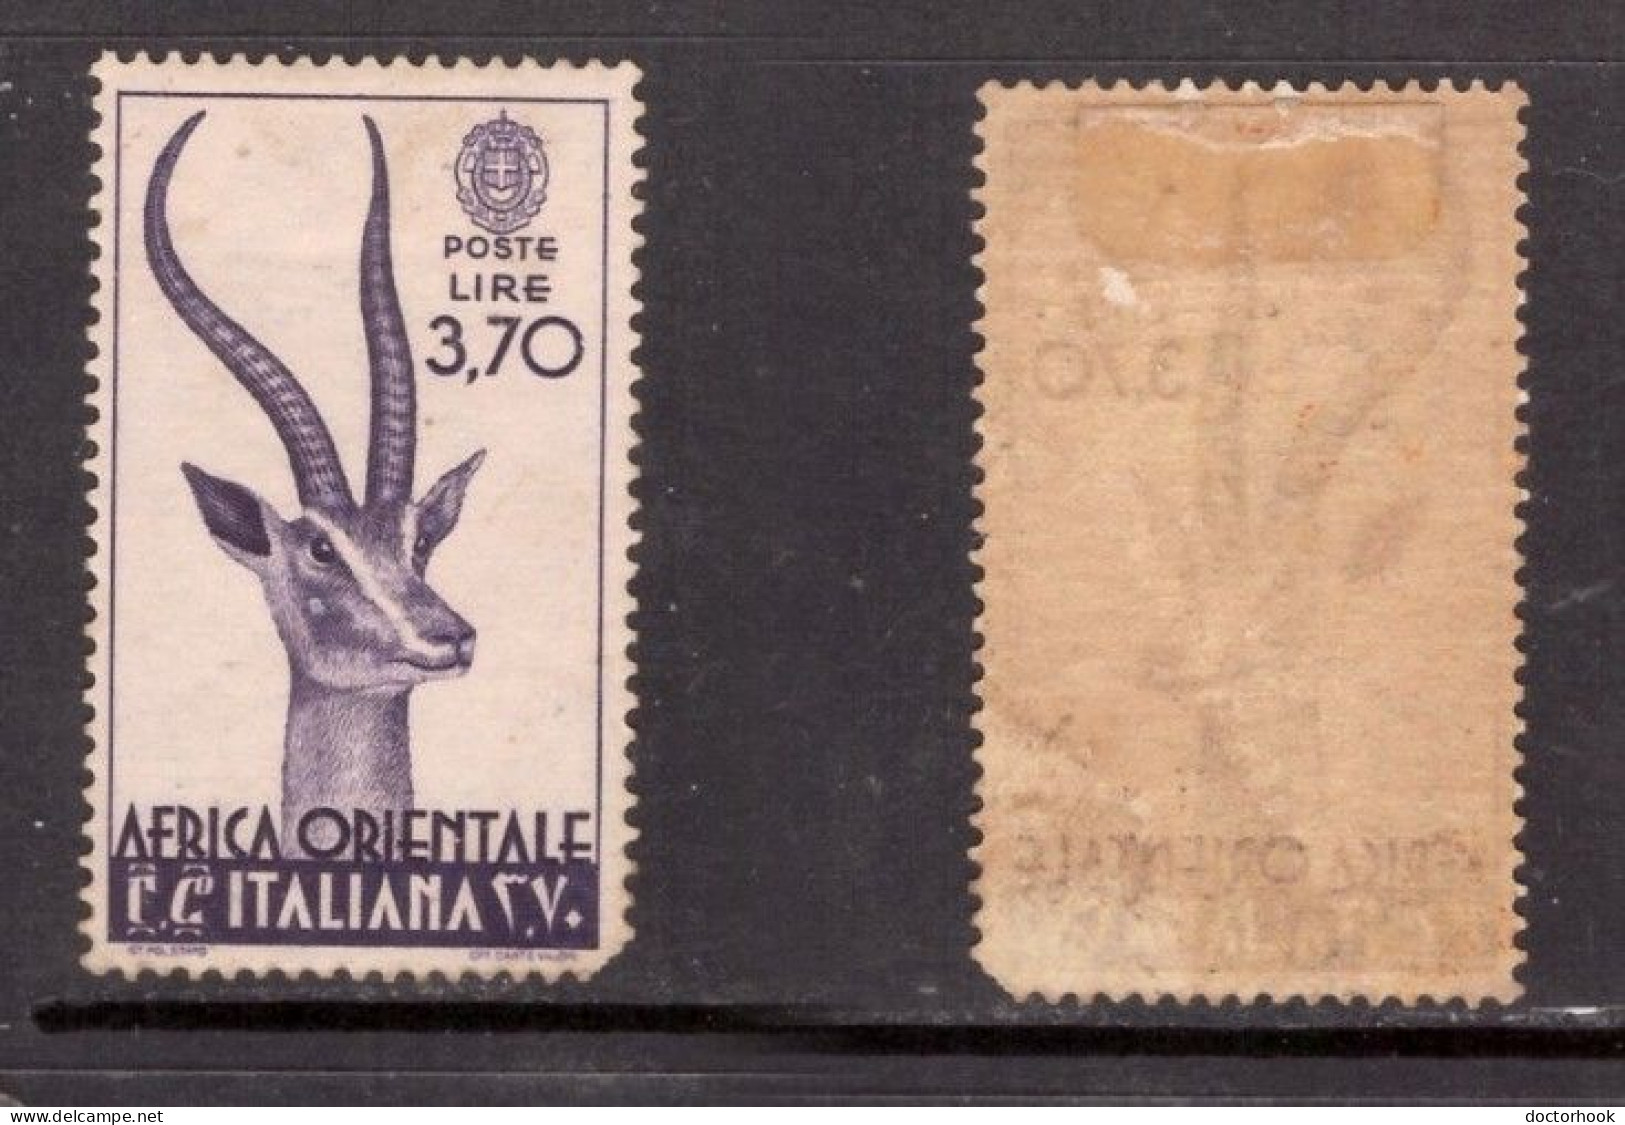 ITALIAN EAST AFRICA   Scott # 17* MINT HINGED (CONDITION AS PER SCAN) (Stamp Scan # 957-1) - Ostafrika